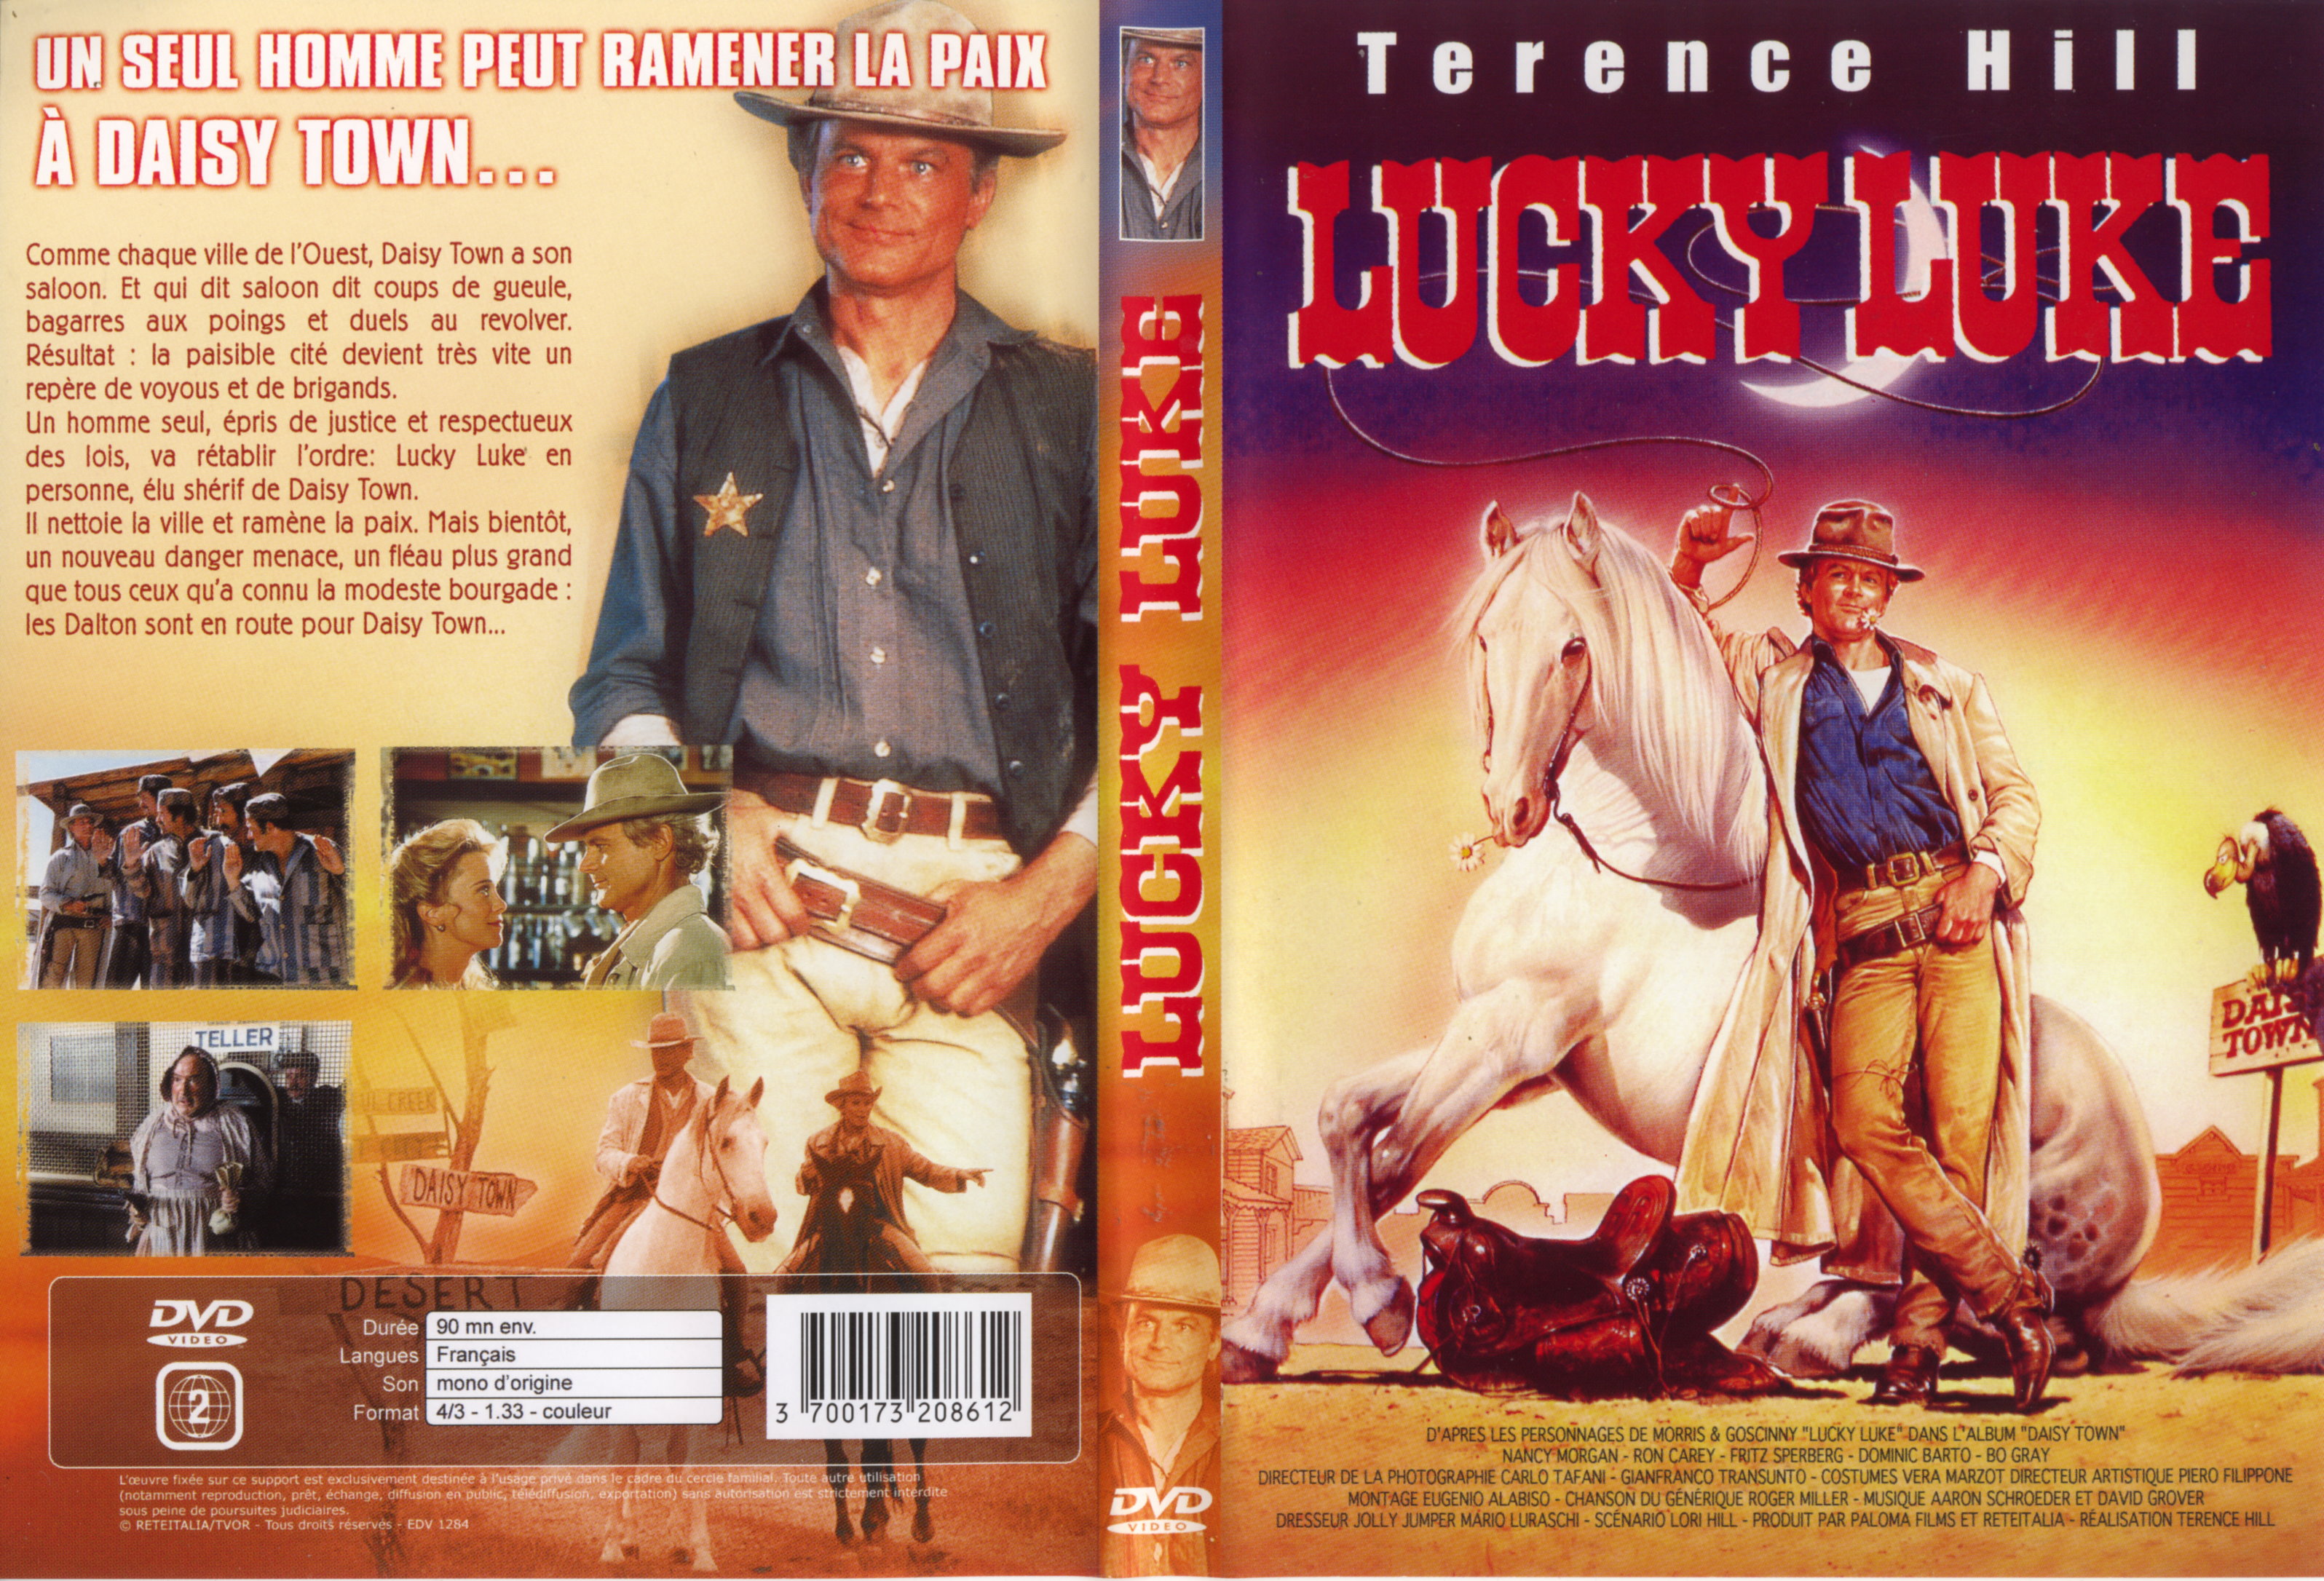 Jaquette DVD Lucky luke (Terence Hill) le film